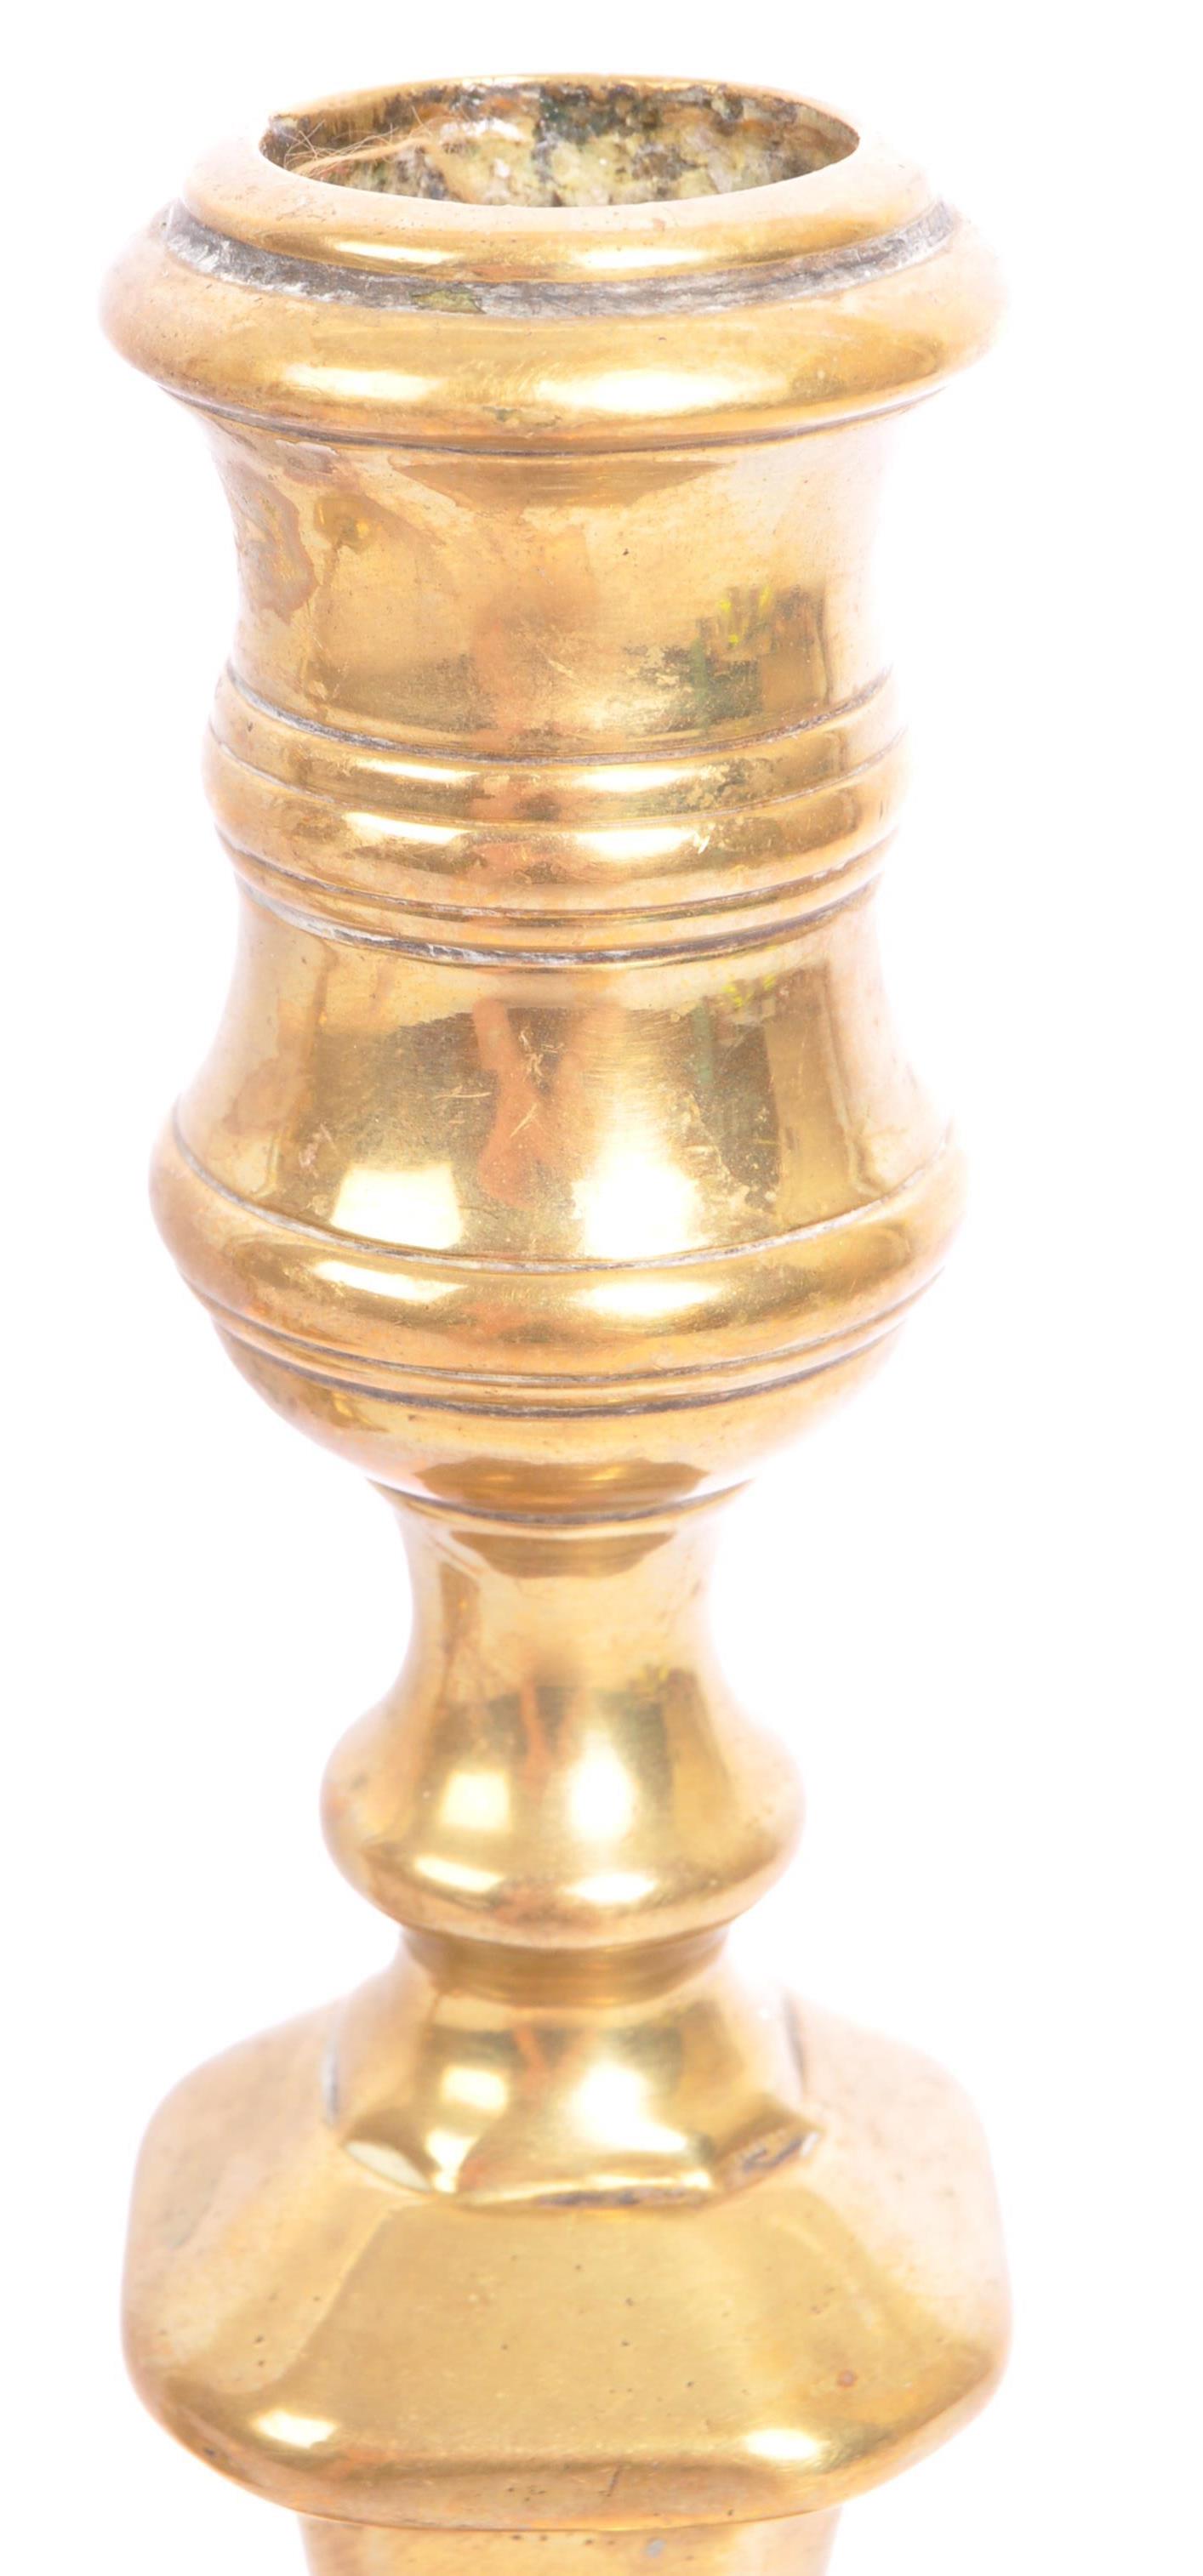 PAIR OF GEORGE III EARLY 19TH CENTURY BRASS CANDLE HOLDERS - Image 3 of 6